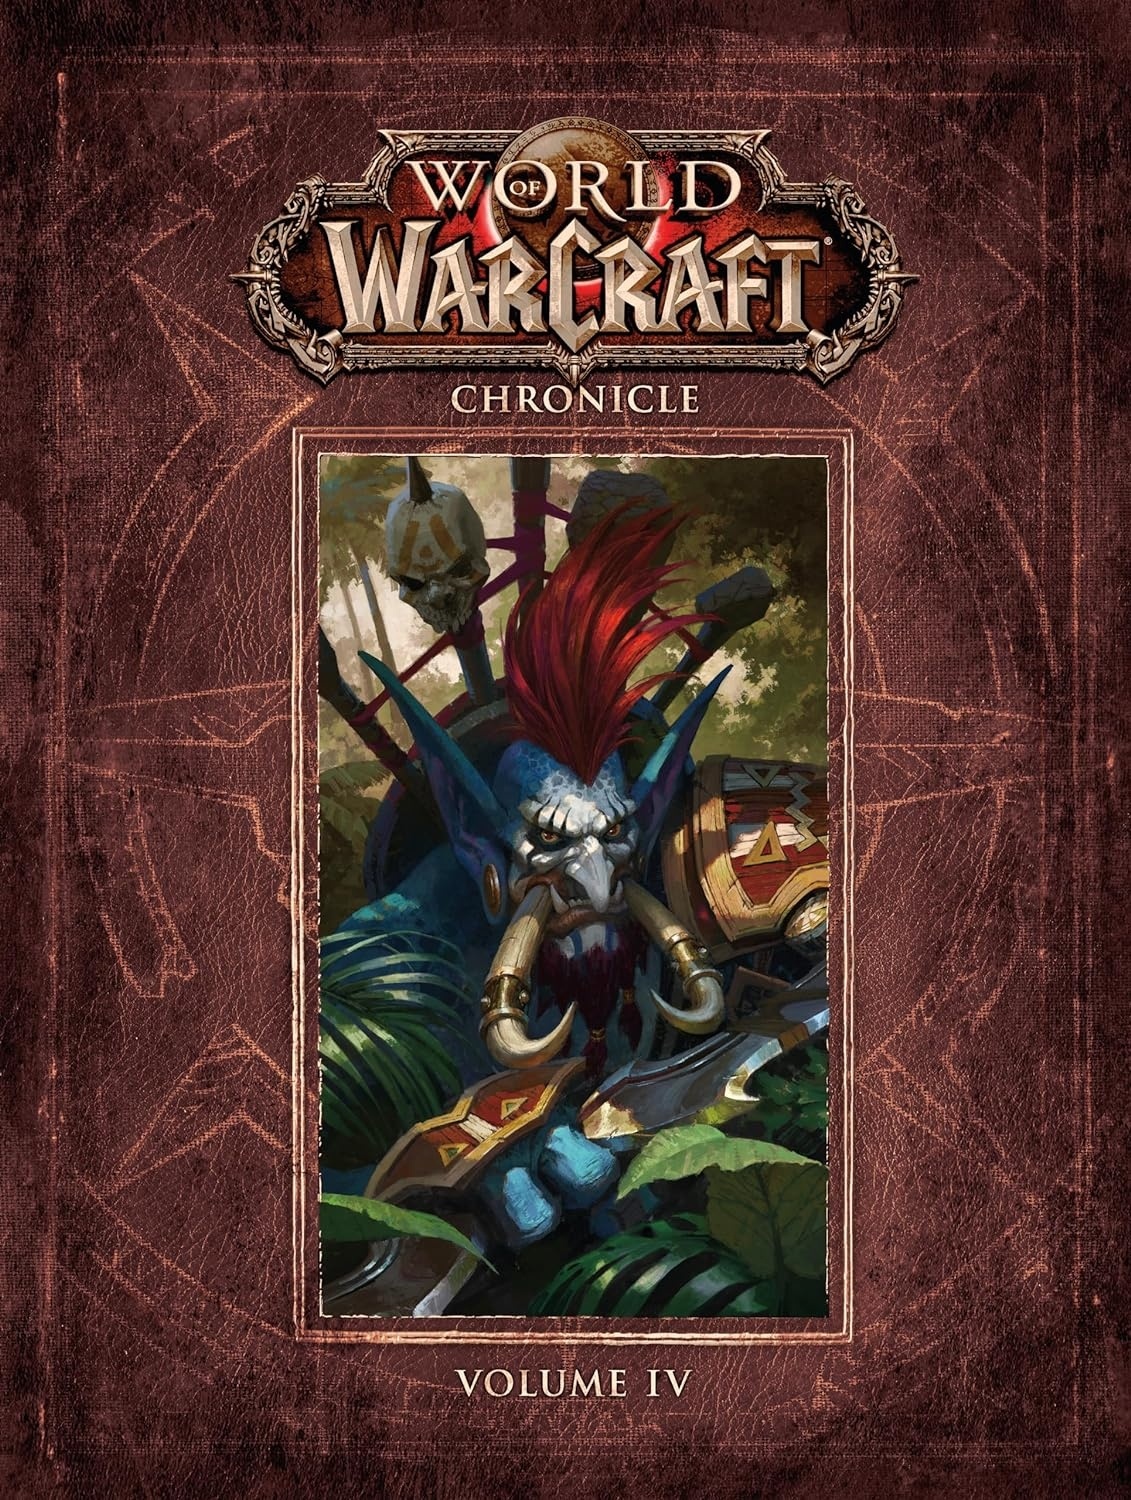 World of Warcraft Chronicle Volume 4 Now Available for Pre